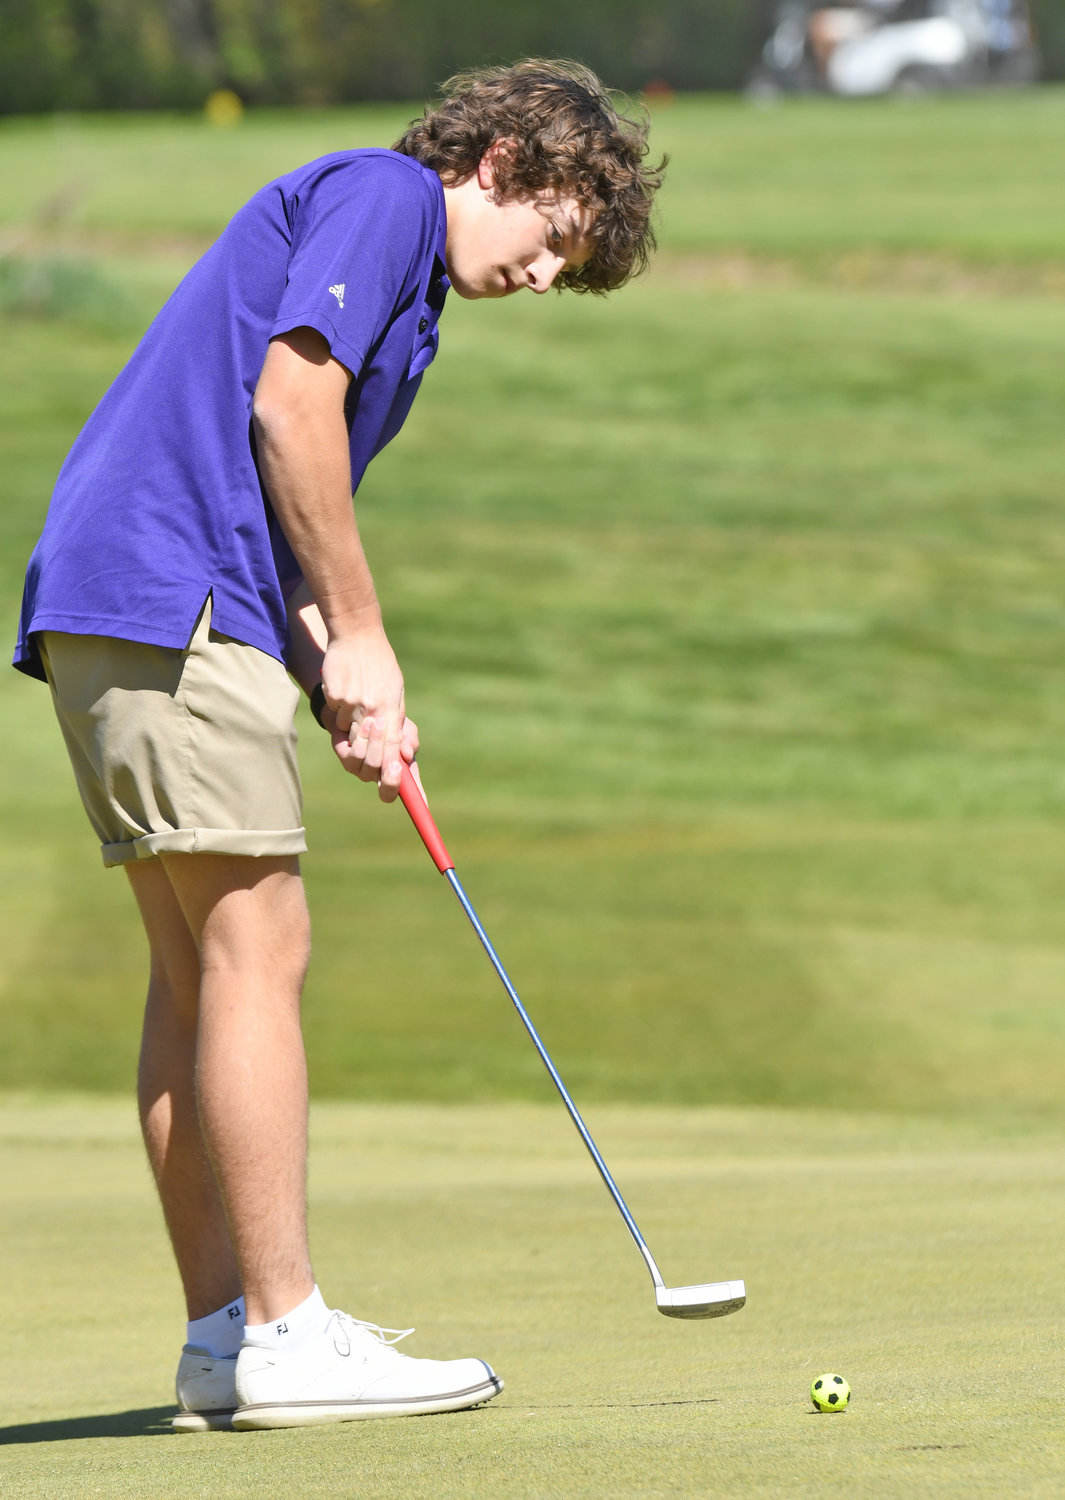 Jacob Olearczyk of Holland Patent watches his putt during a recent round in which he settled for pair. He said his short game is an area he's worked on in his game.